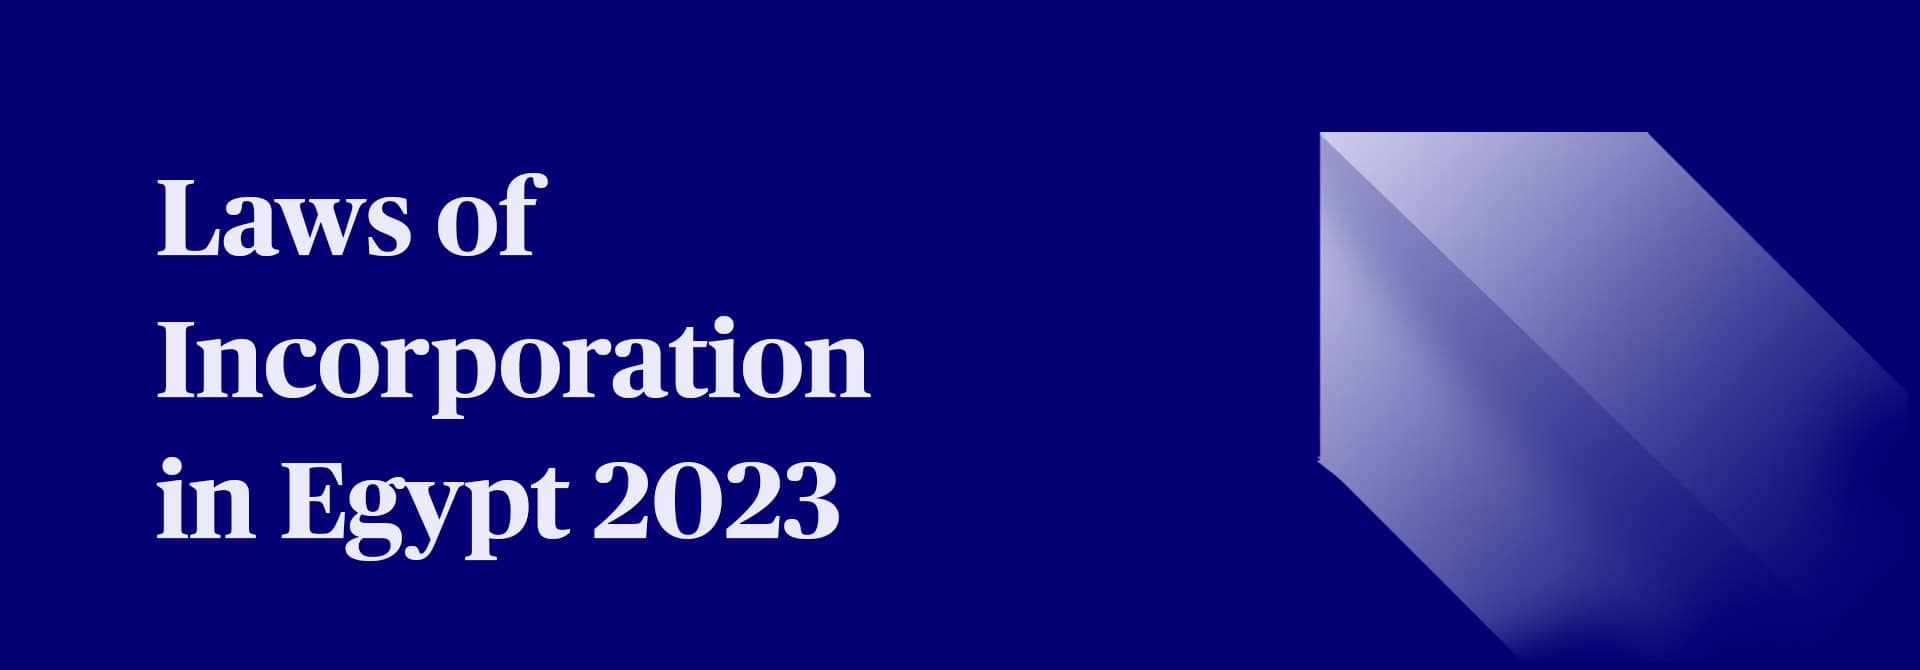 Laws of Incorporation in Egypt 2023